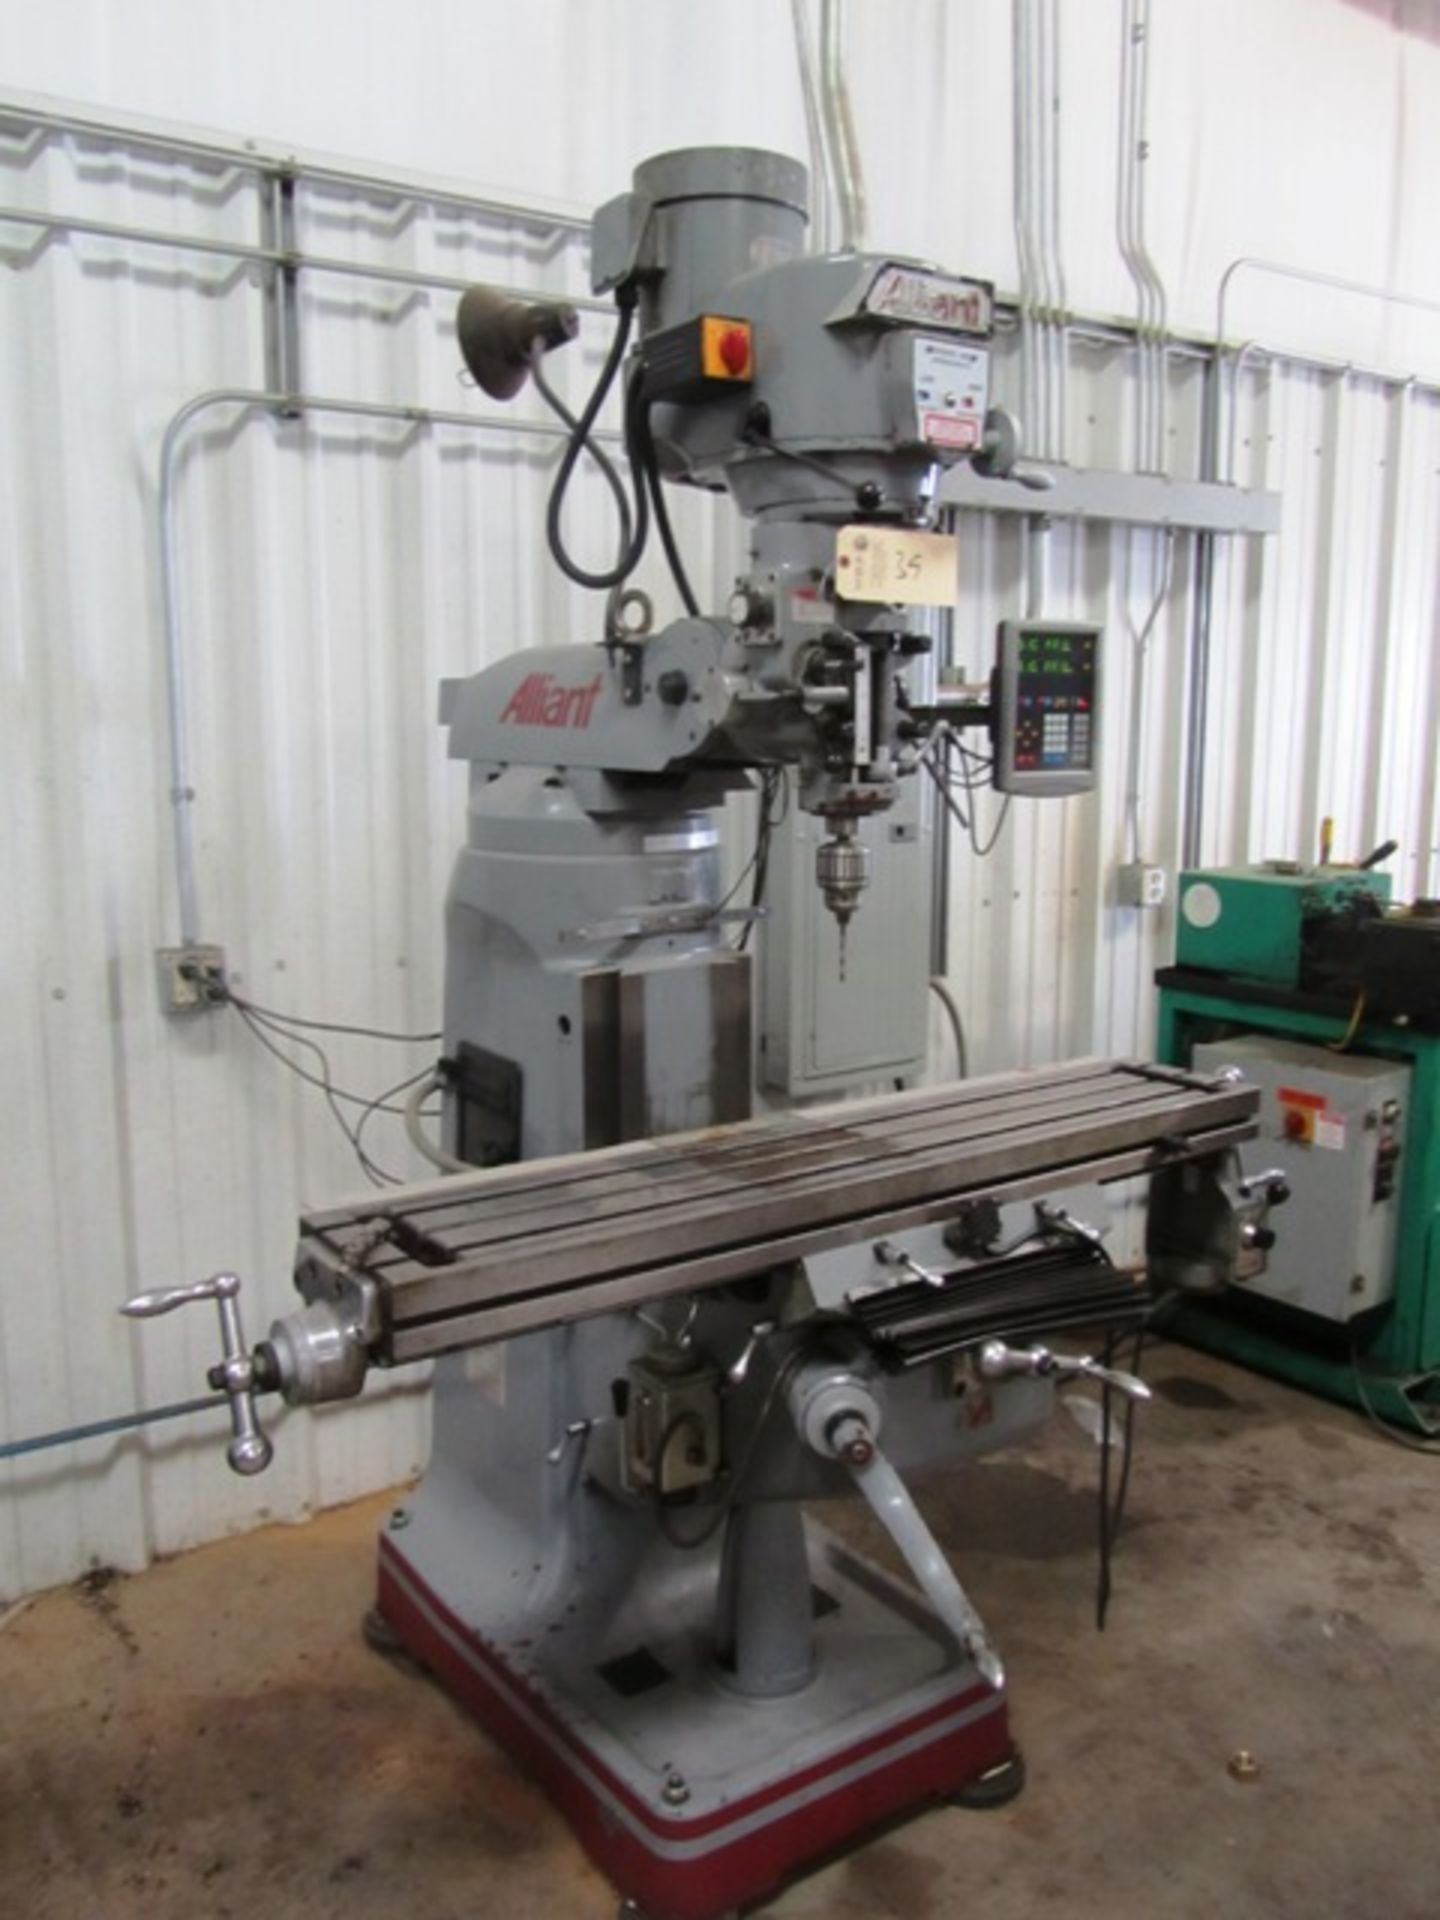 Alliant Model 949-3V Variable Speed Knee Mill with 9'' x 50'' Power Feed Table, R-8 Spindle Speeds - Image 3 of 3